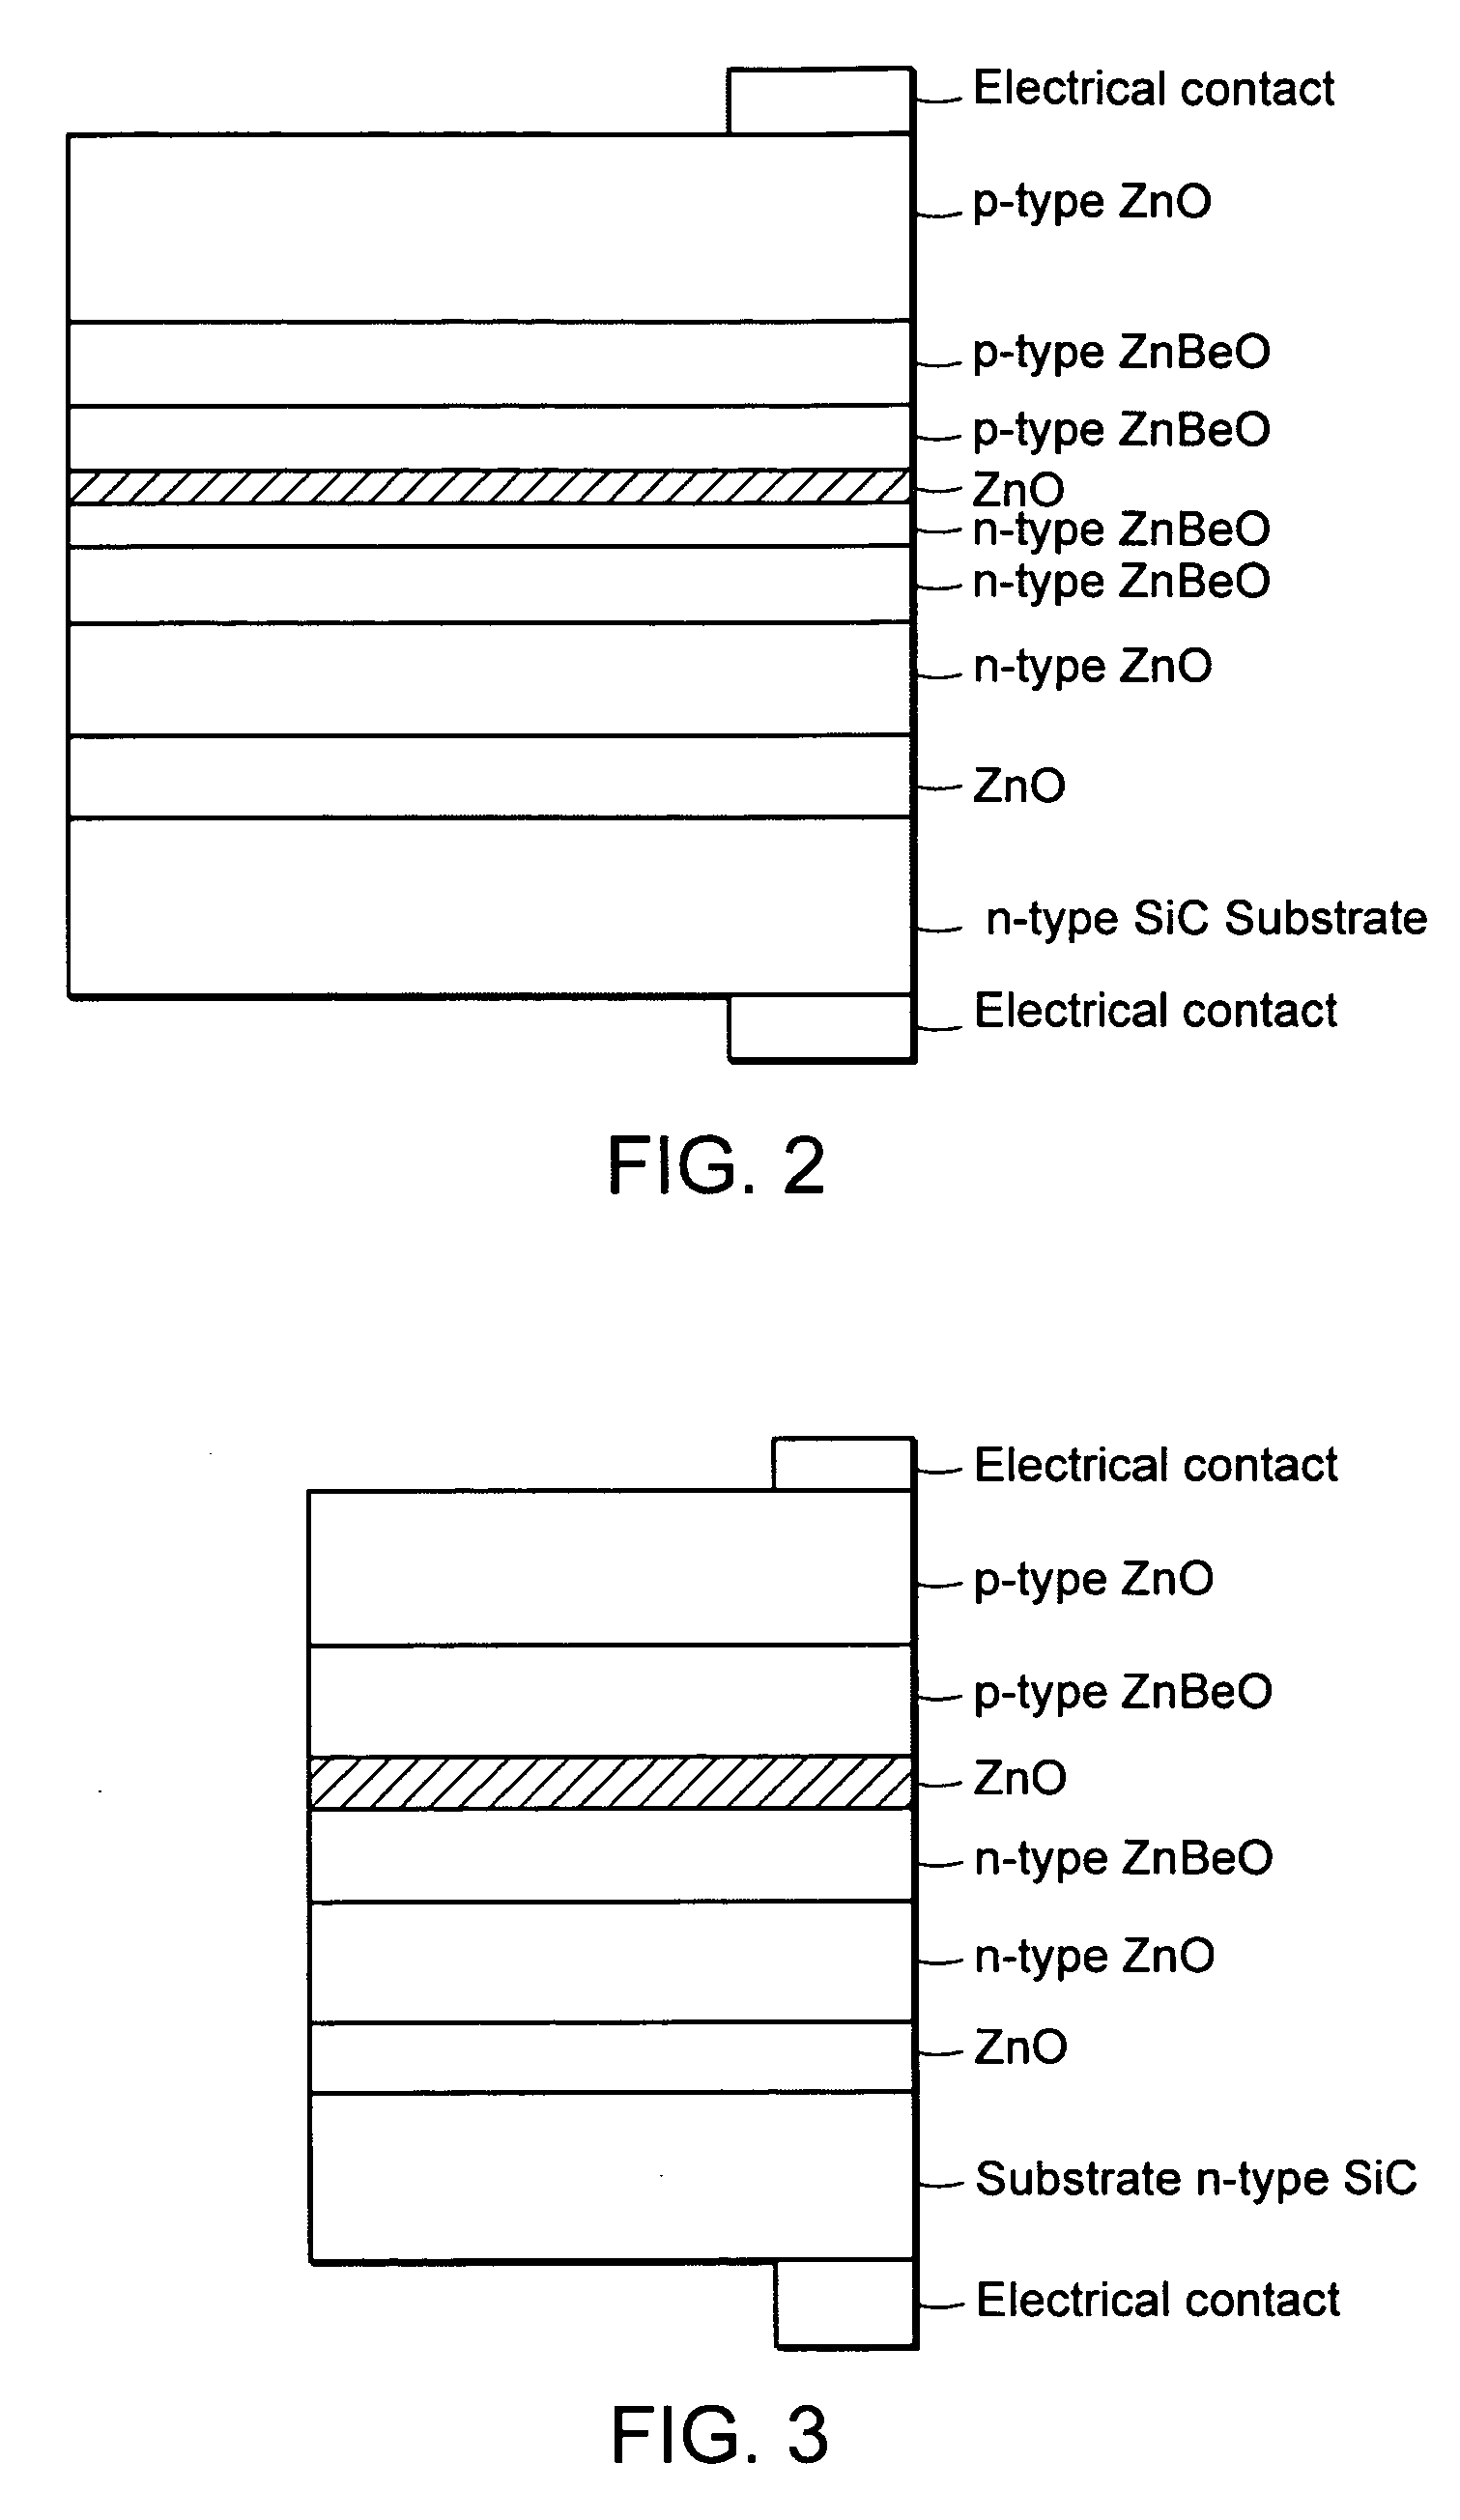 Metal oxide semiconductor film structures and methods